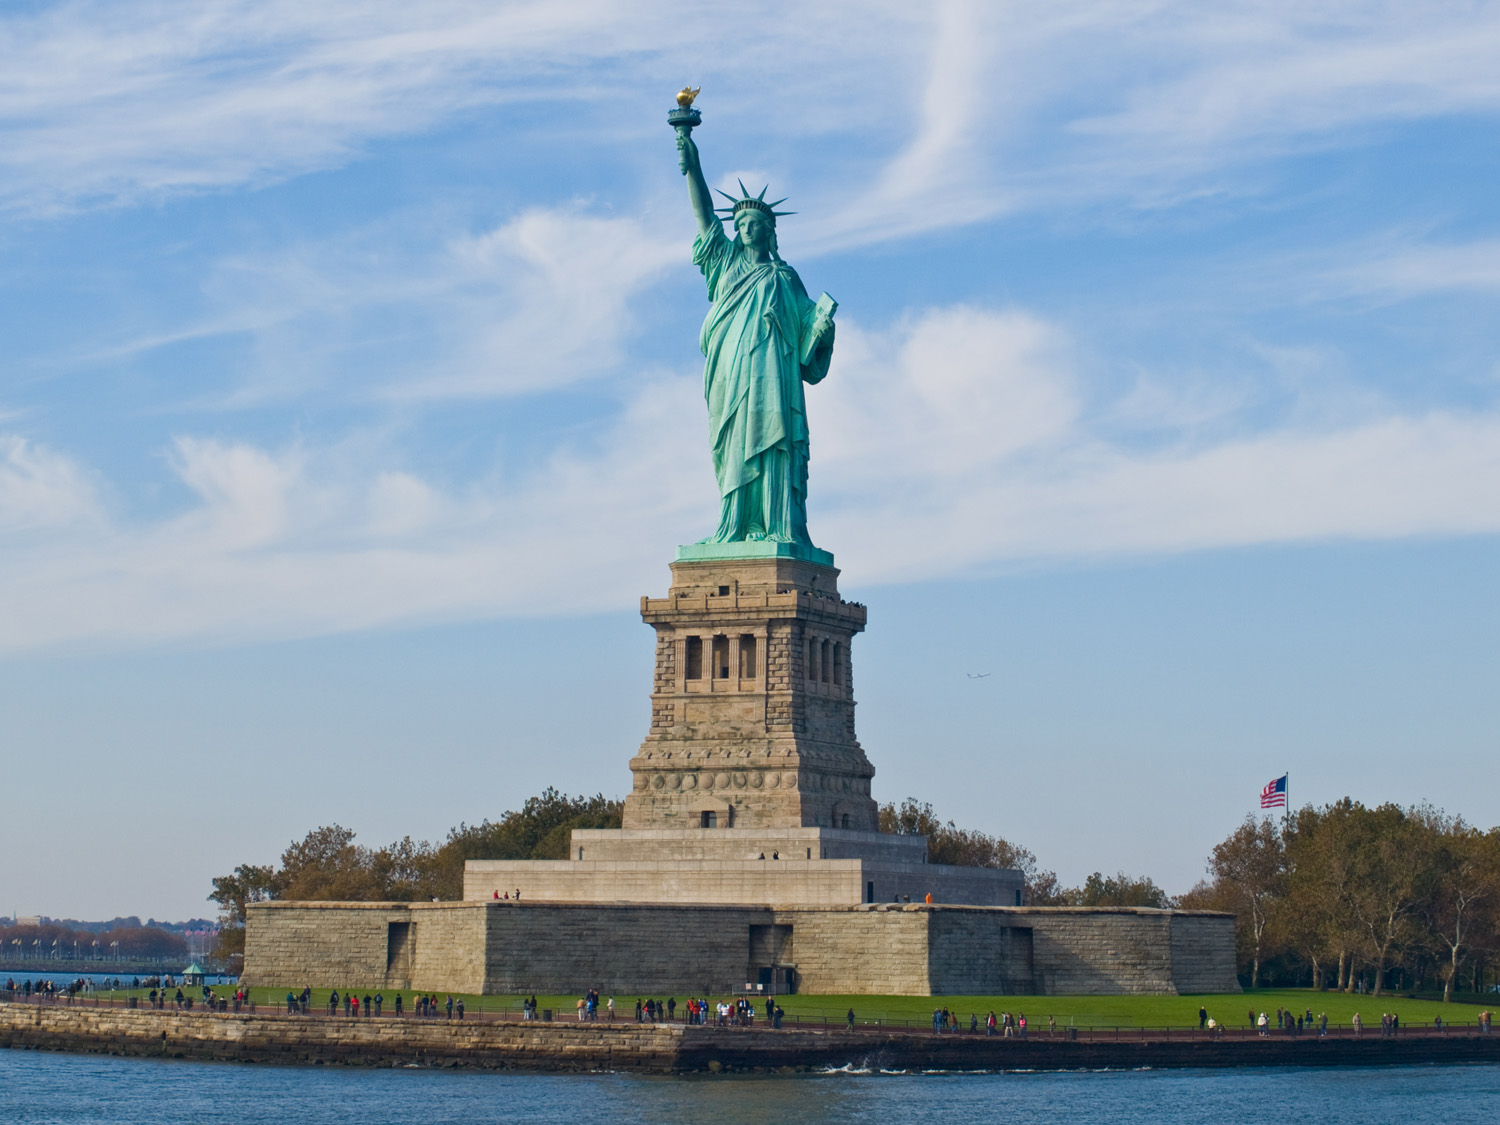 After 8 Years, Statue of Liberty’s Crown Reopens